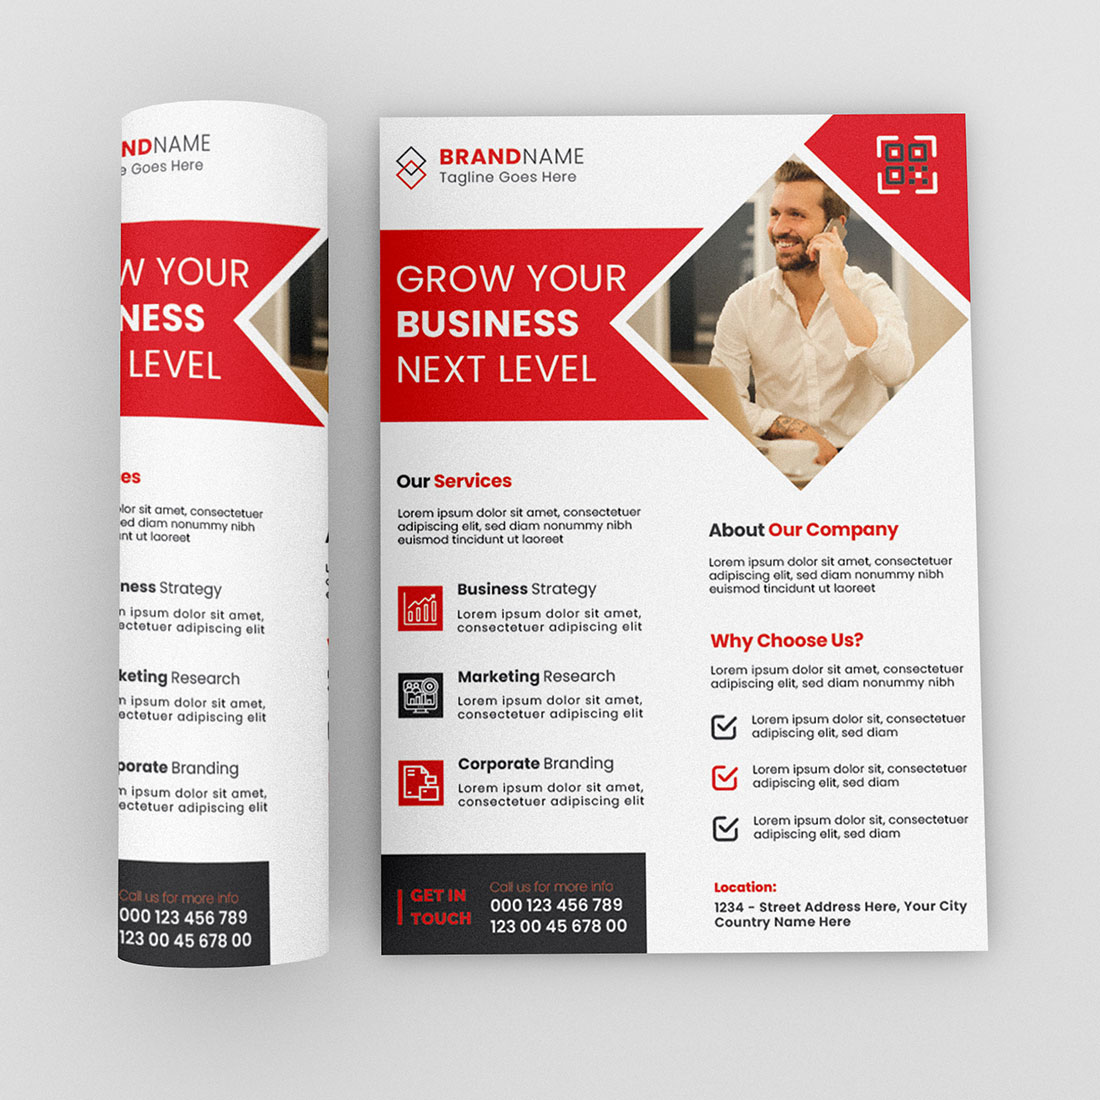 Image of beautiful business flyer template in red color